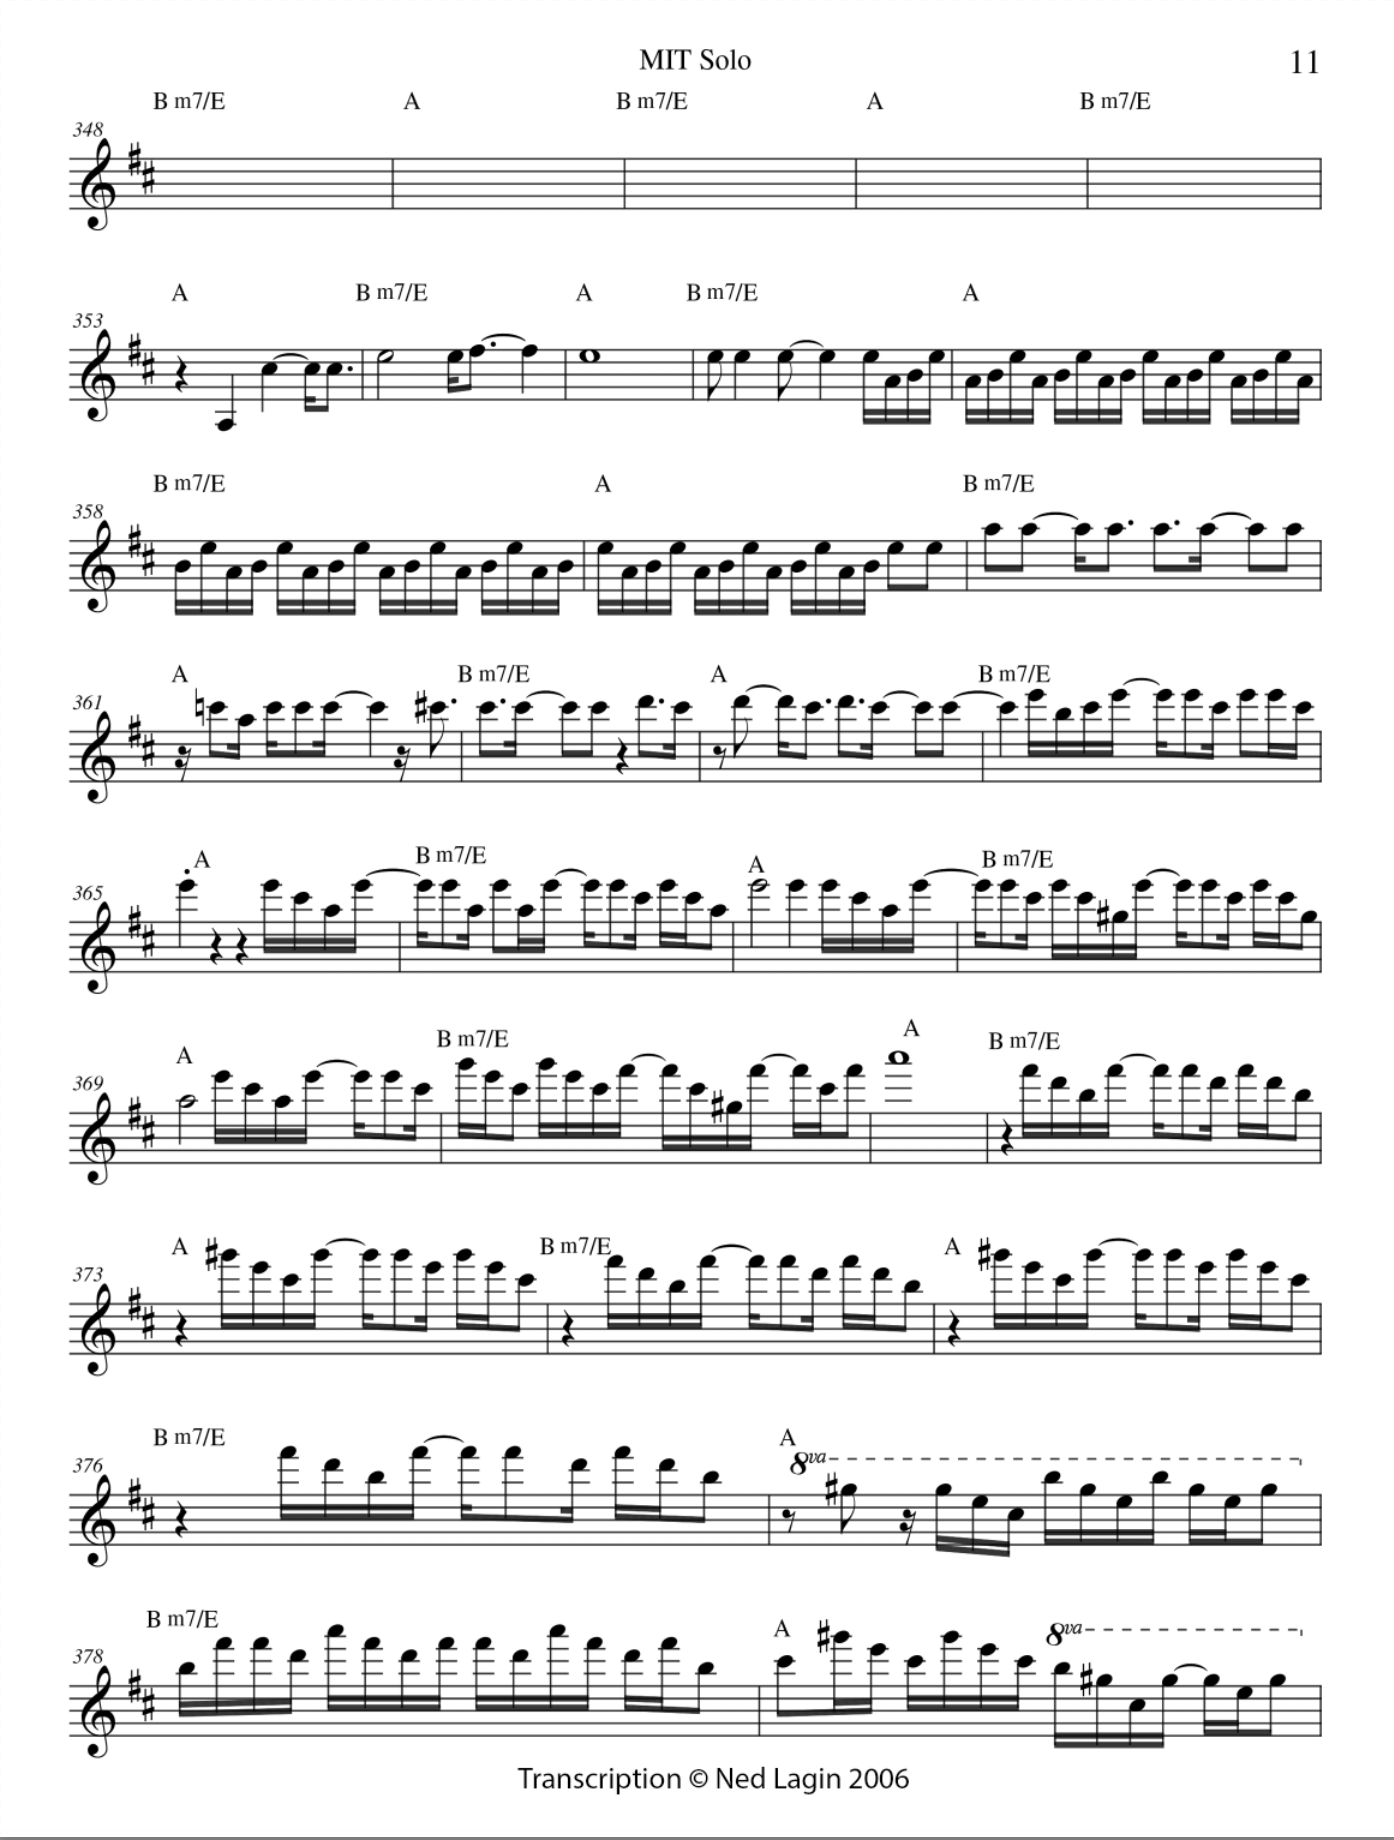 Jerry Garcia guitar solo transcription Page 11 - Photo © Ned Lagin